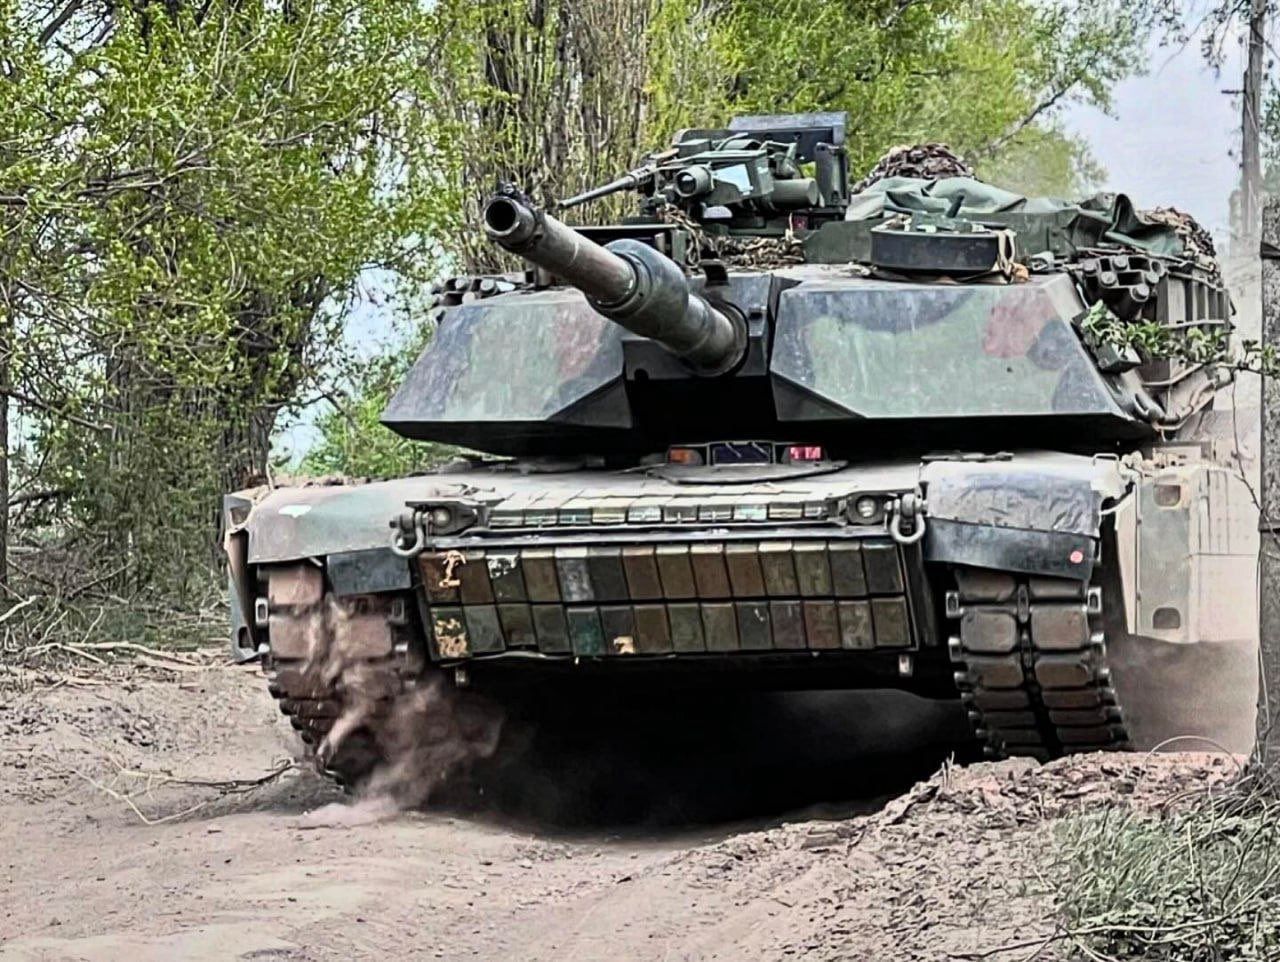 Abrams tanks outfitted with reactive armour debut in the Ukraine conflict